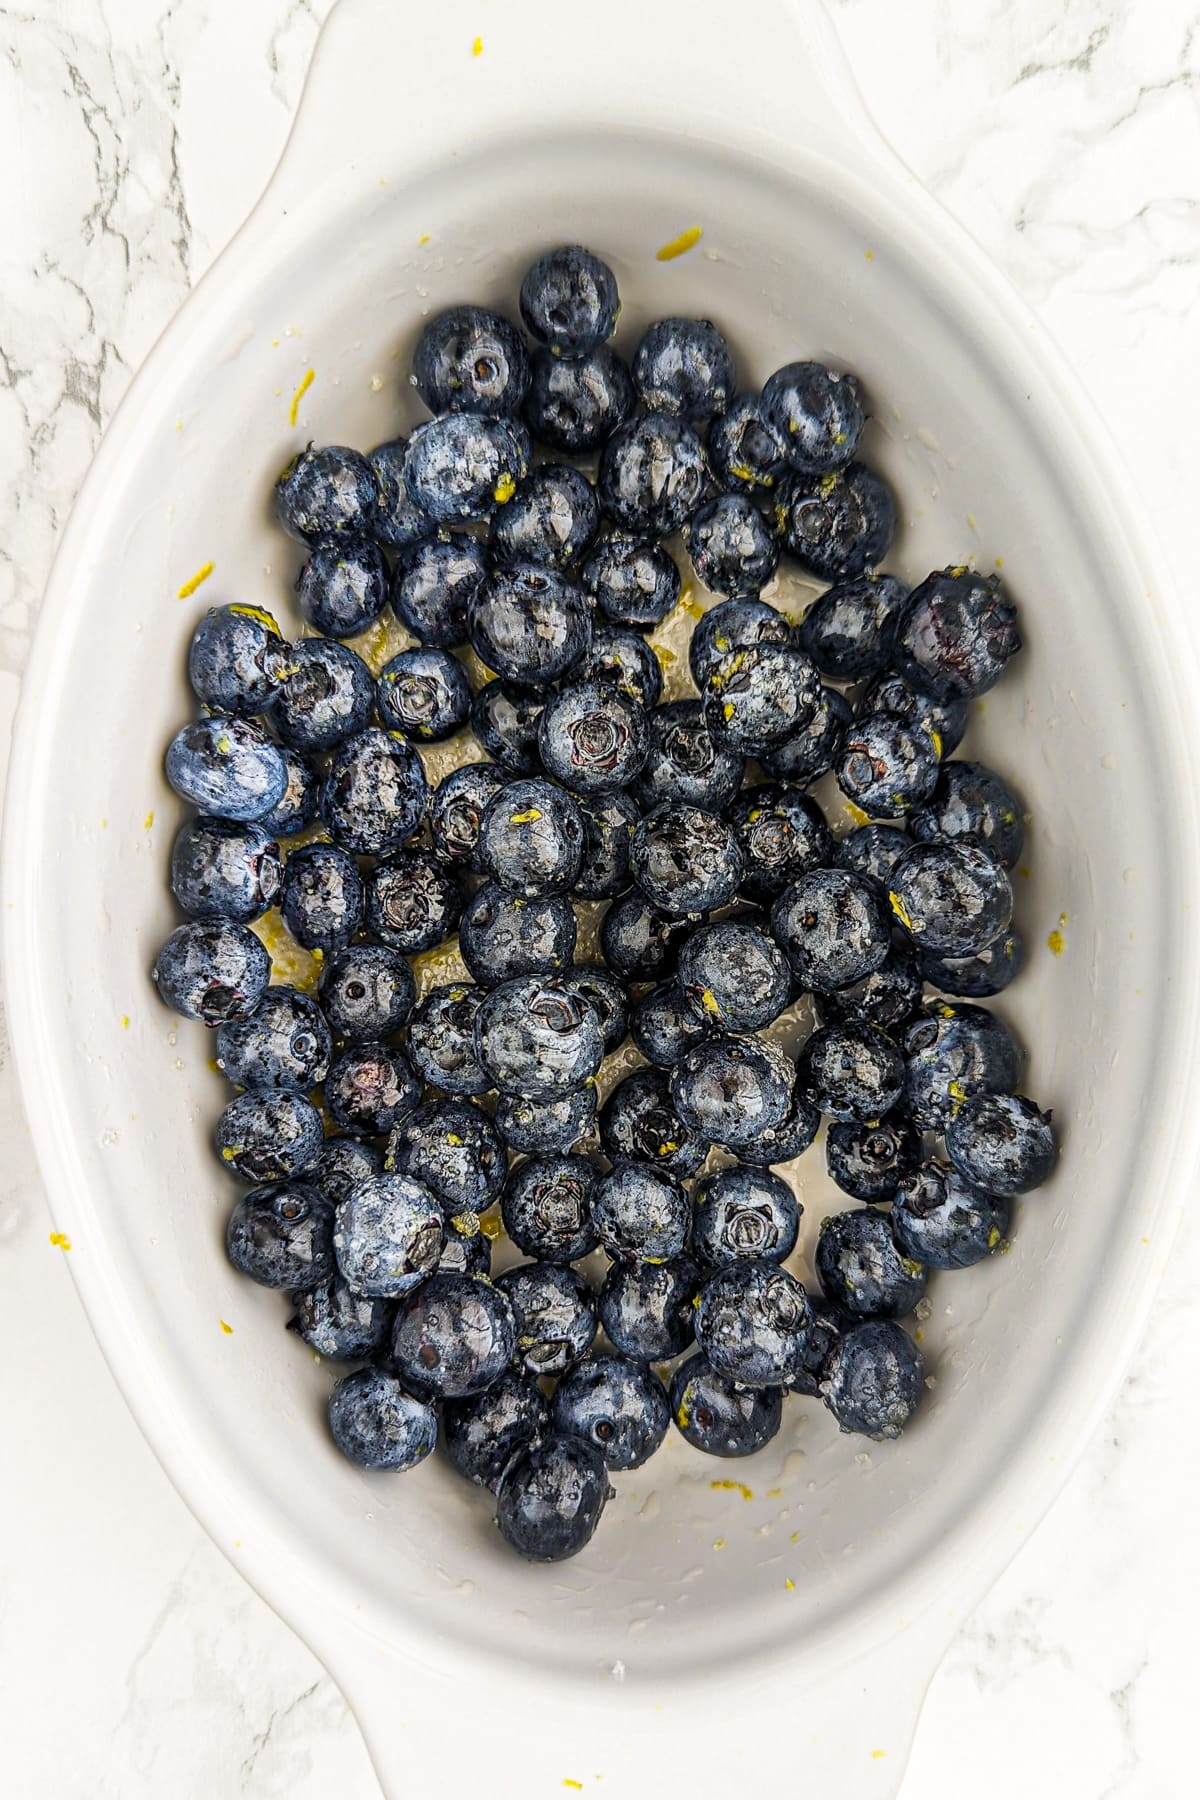 White baking dish filled with blueberries on a white marble table.